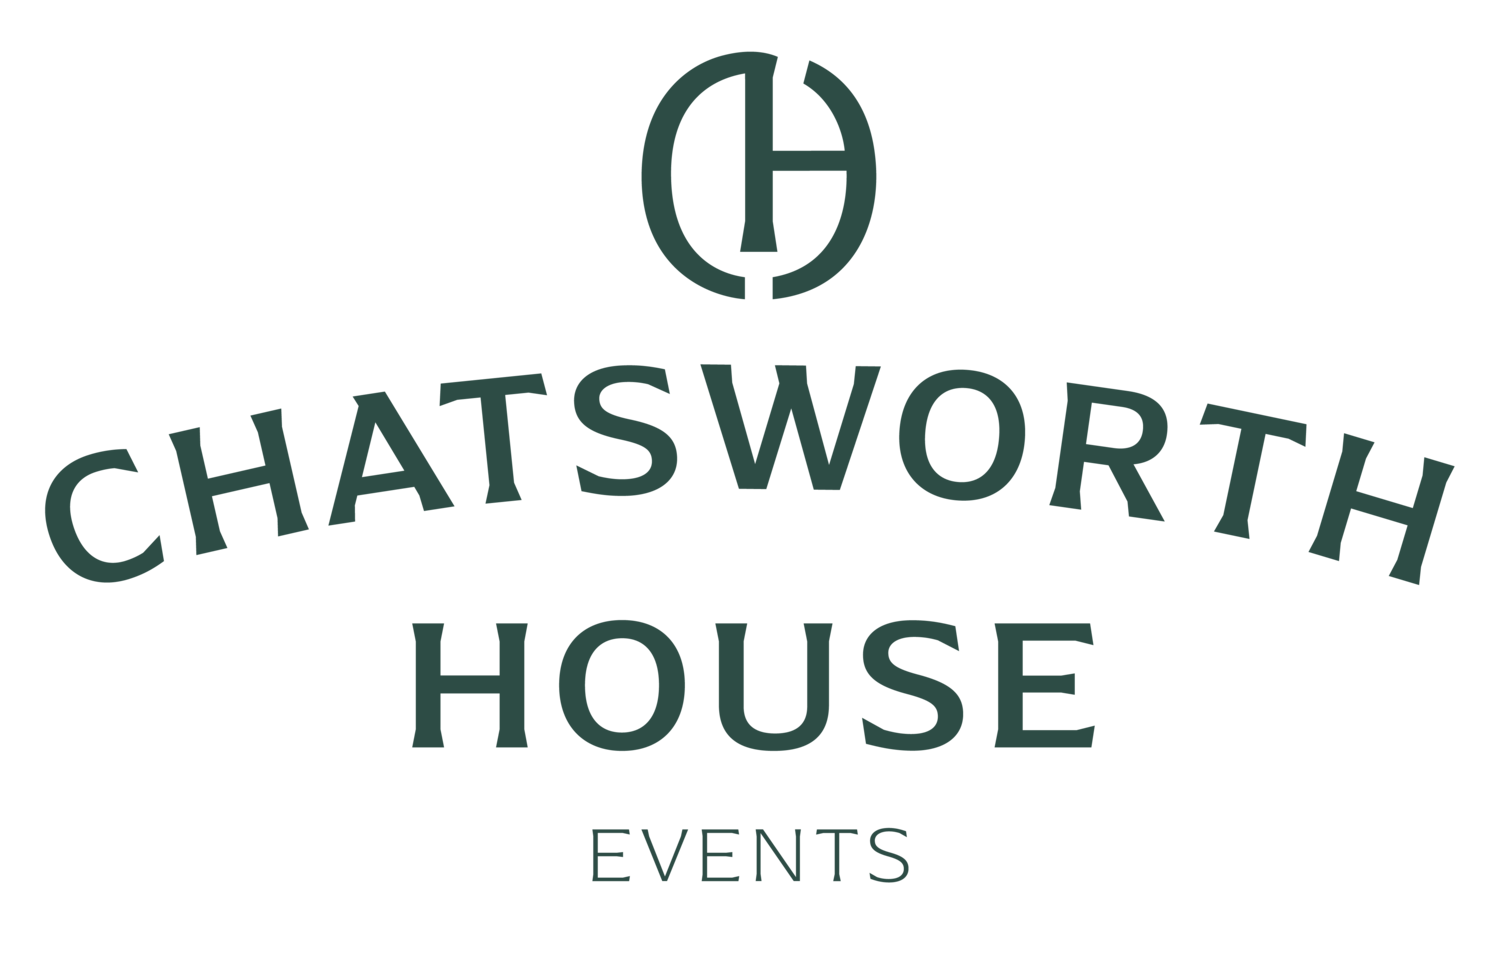 Chatsworth House Events